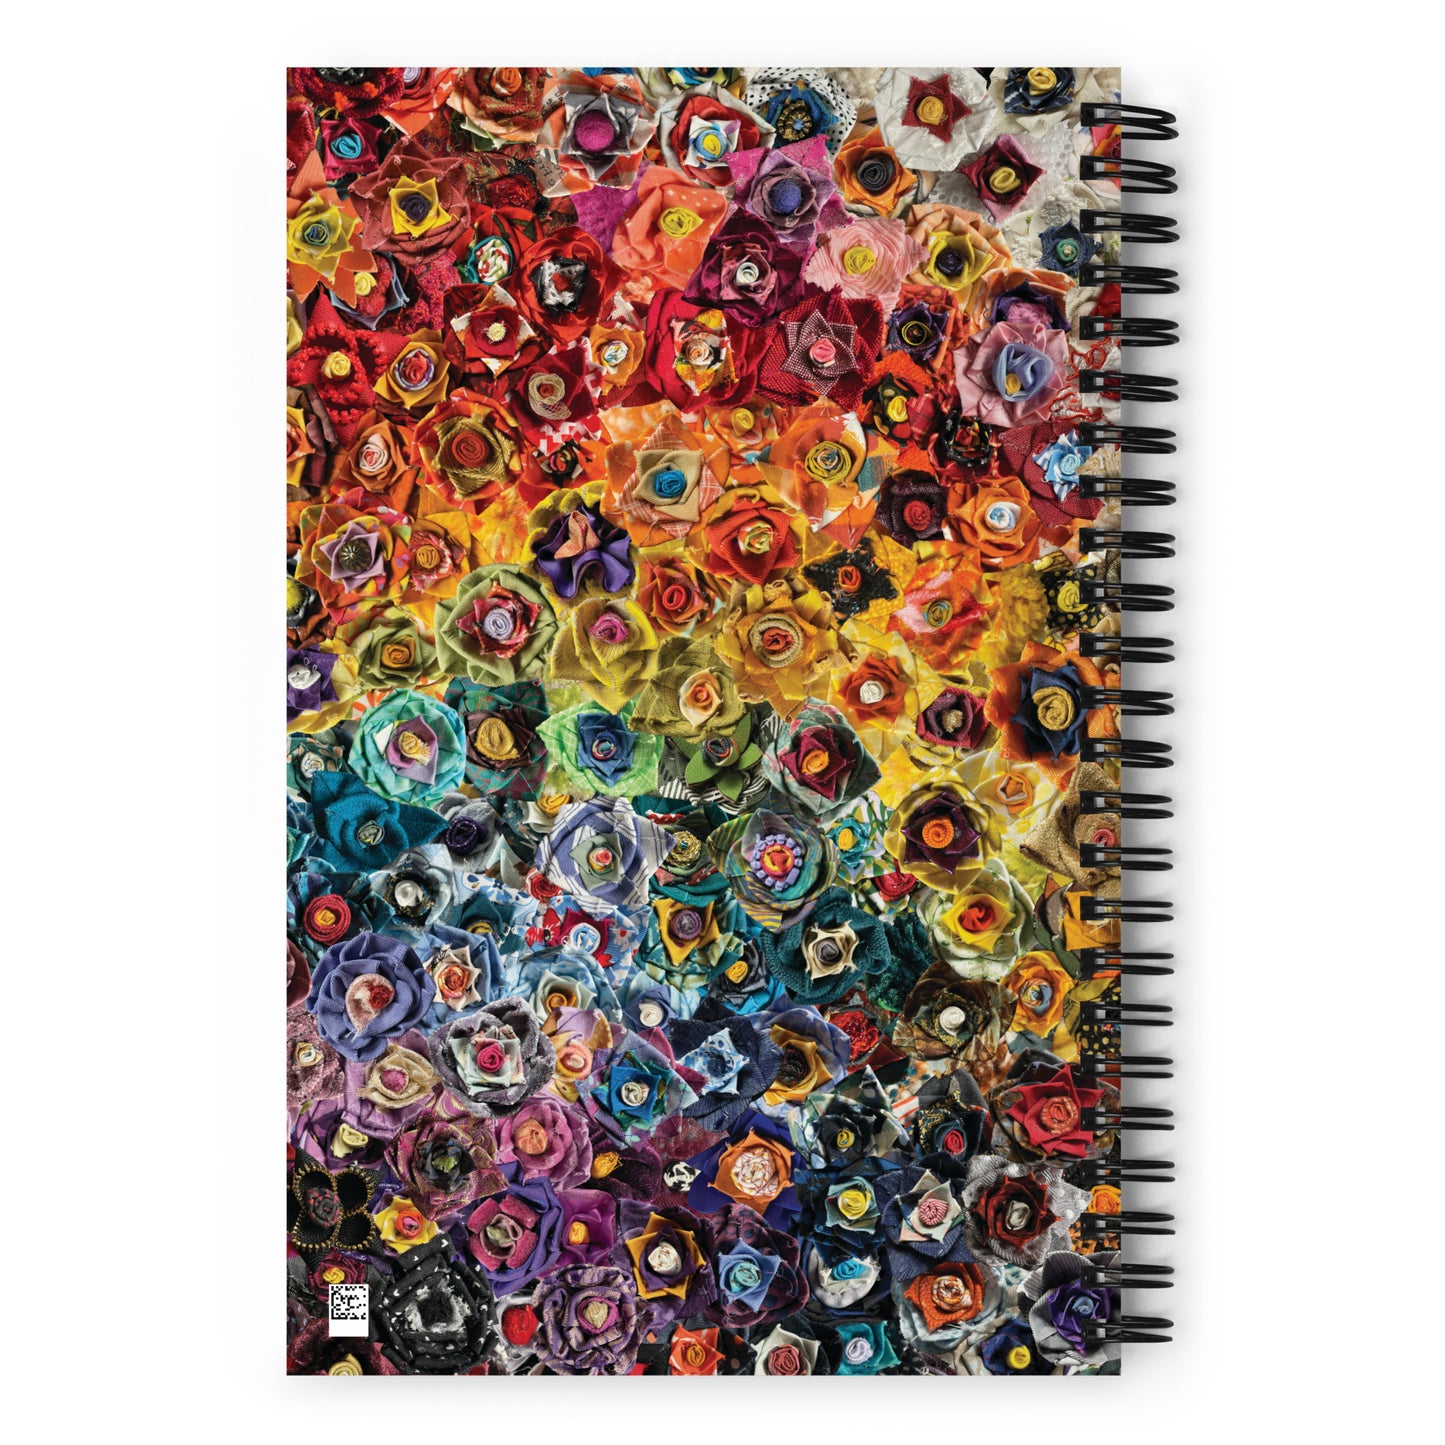 Spiral bound notebook with a rainbow image of fabric flowers